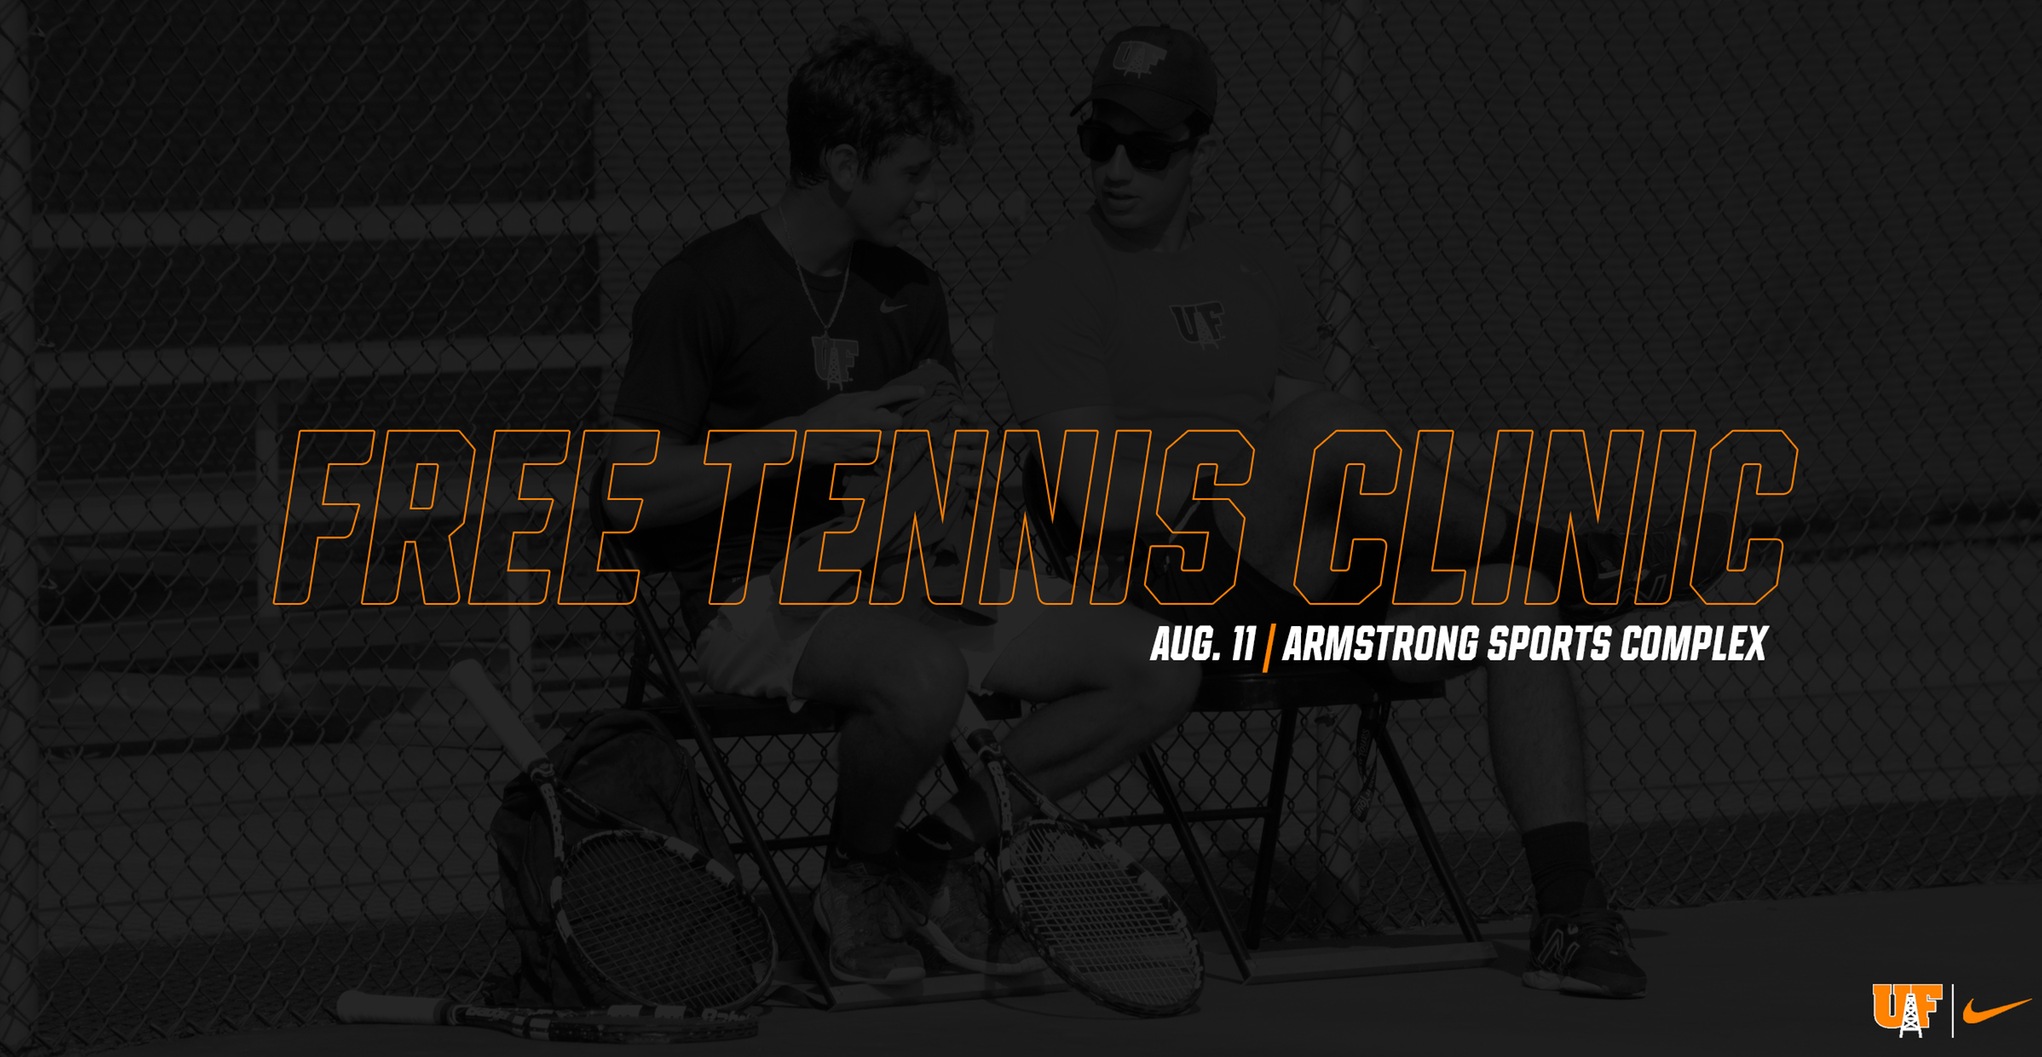 Oilers to Host FREE Tennis Clinic